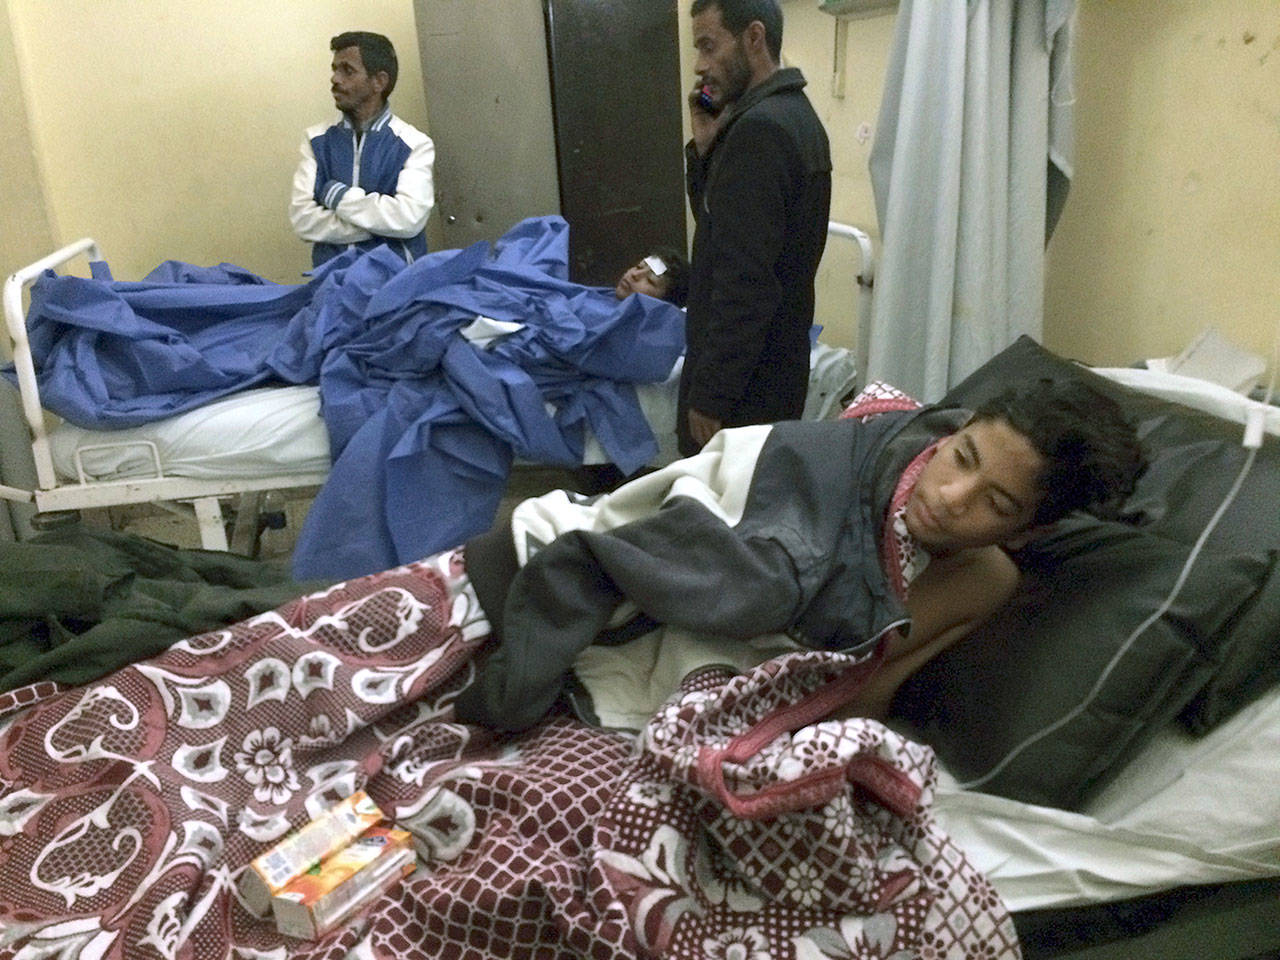 Abdallah Abdel Nasser, 14, receives medical treatment at Suez Canal University hospital in Ismailia, Egypt, on Friday after he was in injured during an attack on a mosque. (AP Photo/Amr Nabil)